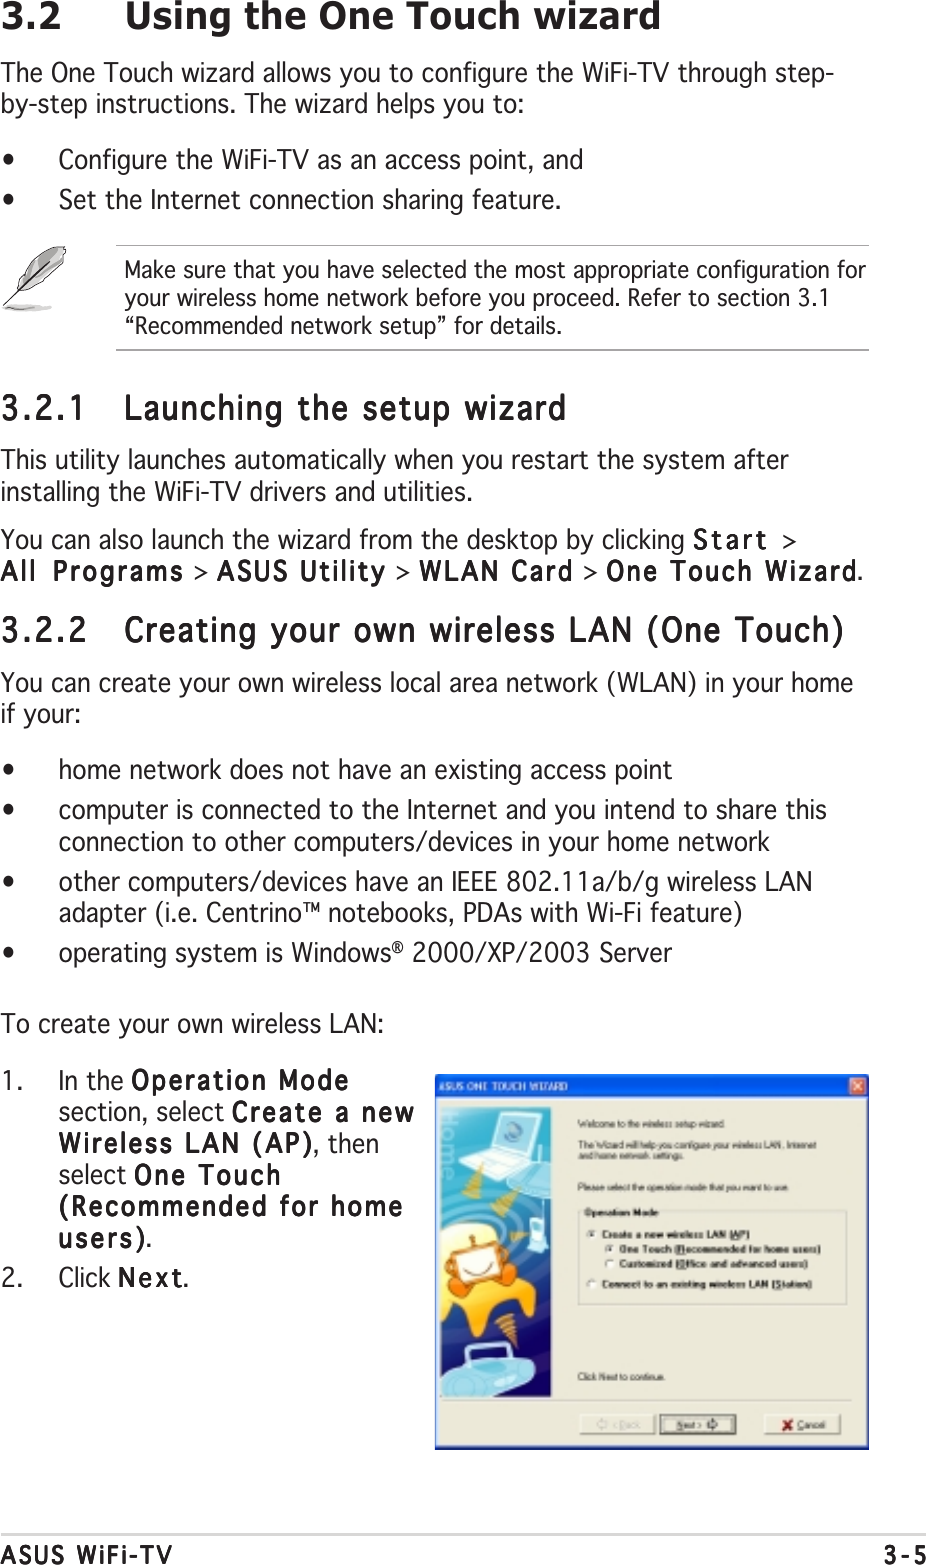 ASUS WiFi-TVASUS WiFi-TVASUS WiFi-TVASUS WiFi-TVASUS WiFi-TV 3-53-53-53-53-53.2 Using the One Touch wizardThe One Touch wizard allows you to configure the WiFi-TV through step-by-step instructions. The wizard helps you to:•Configure the WiFi-TV as an access point, and•Set the Internet connection sharing feature.Make sure that you have selected the most appropriate configuration foryour wireless home network before you proceed. Refer to section 3.1“Recommended network setup” for details.3.2.13.2.13.2.13.2.13.2.1 Launching the setup wizardLaunching the setup wizardLaunching the setup wizardLaunching the setup wizardLaunching the setup wizardThis utility launches automatically when you restart the system afterinstalling the WiFi-TV drivers and utilities.You can also launch the wizard from the desktop by clicking StartStartStartStartStart &gt;All Programs All Programs All Programs All Programs All Programs &gt; ASUS Utility ASUS Utility ASUS Utility ASUS Utility ASUS Utility &gt; WLAN Card WLAN Card WLAN Card WLAN Card WLAN Card &gt; One Touch WizardOne Touch WizardOne Touch WizardOne Touch WizardOne Touch Wizard.3.2.23.2.23.2.23.2.23.2.2 Creating your own wireless LAN (One Touch)Creating your own wireless LAN (One Touch)Creating your own wireless LAN (One Touch)Creating your own wireless LAN (One Touch)Creating your own wireless LAN (One Touch)You can create your own wireless local area network (WLAN) in your homeif your:•home network does not have an existing access point•computer is connected to the Internet and you intend to share thisconnection to other computers/devices in your home network•other computers/devices have an IEEE 802.11a/b/g wireless LANadapter (i.e. Centrino™ notebooks, PDAs with Wi-Fi feature)•operating system is Windows® 2000/XP/2003 ServerTo create your own wireless LAN:1. In the Operation ModeOperation ModeOperation ModeOperation ModeOperation Modesection, select Create a newCreate a newCreate a newCreate a newCreate a newWireless LAN (AP)Wireless LAN (AP)Wireless LAN (AP)Wireless LAN (AP)Wireless LAN (AP), thenselect One TouchOne TouchOne TouchOne TouchOne Touch(Recommended for home(Recommended for home(Recommended for home(Recommended for home(Recommended for homeusers)users)users)users)users).2. Click NextNextNextNextNext.